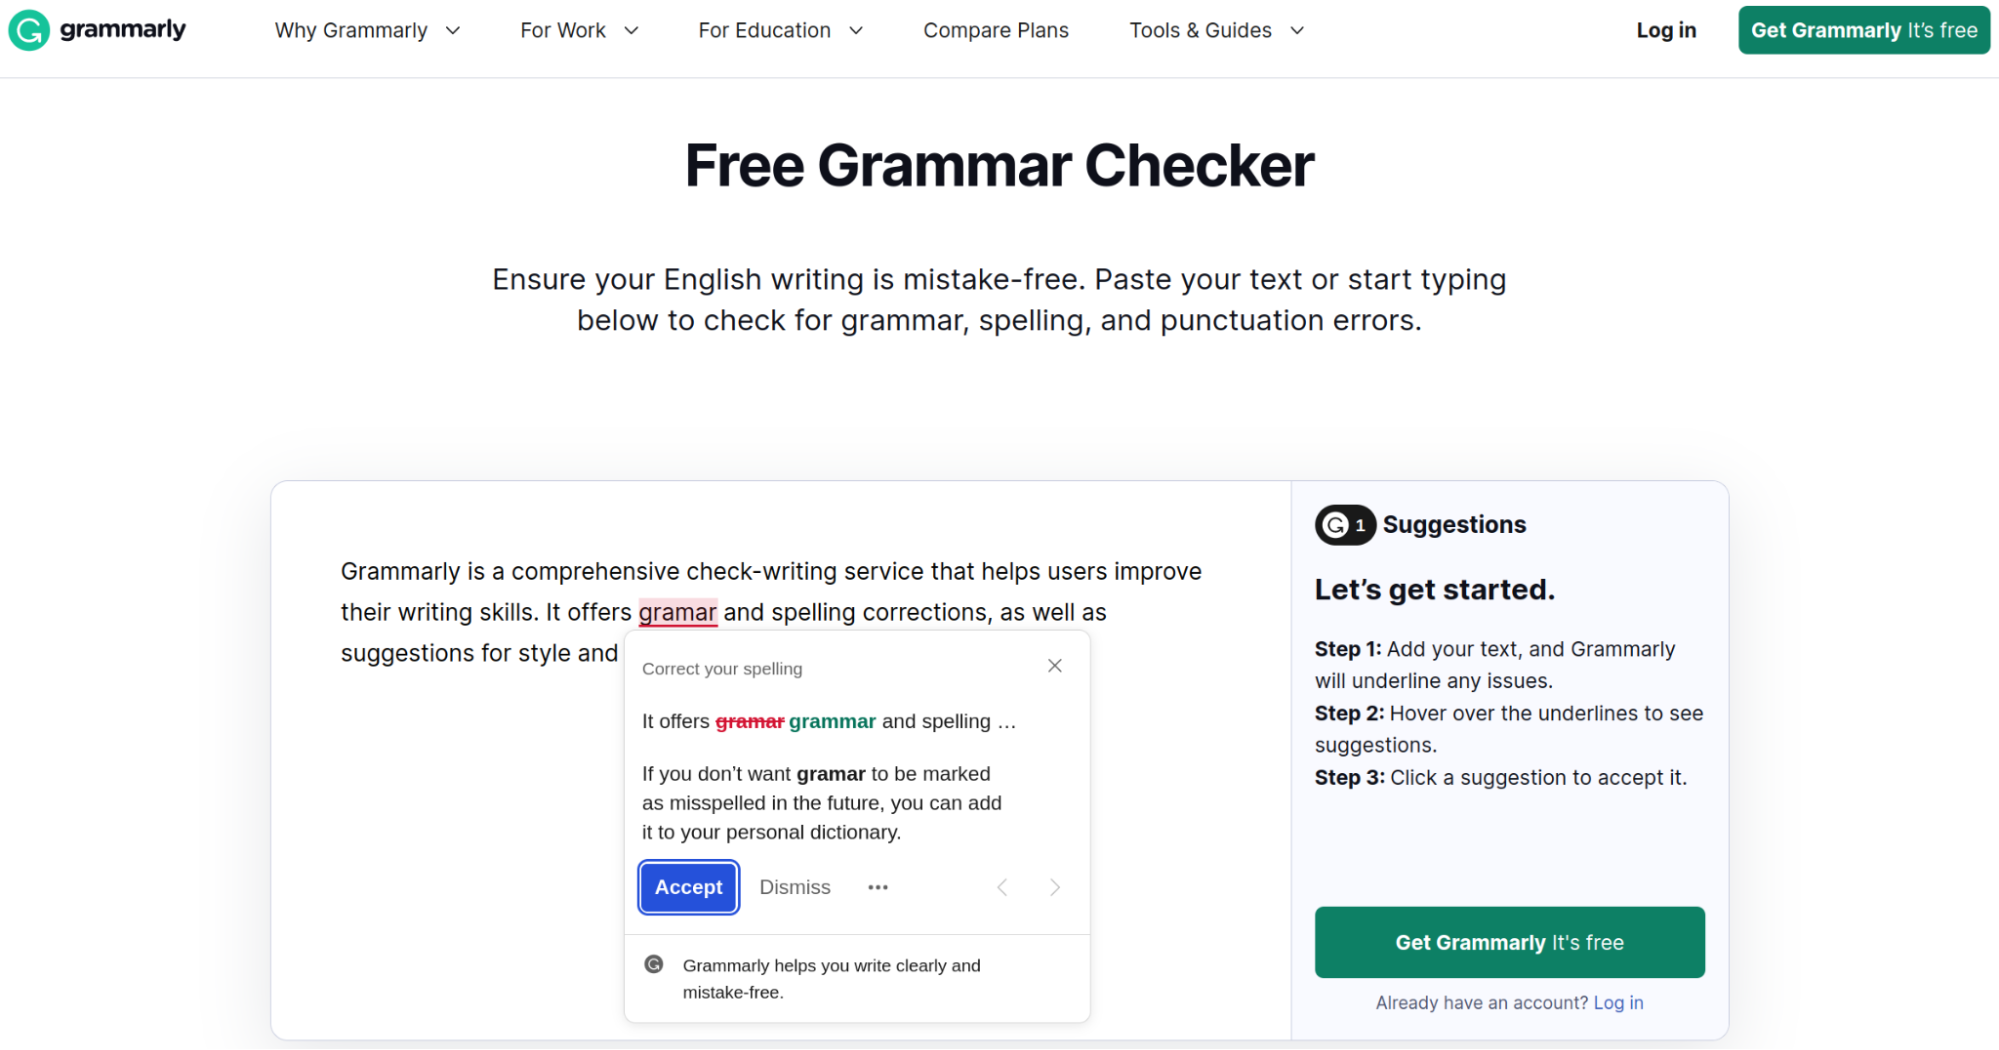 Check-writing service for improving writing skills - Grammarly